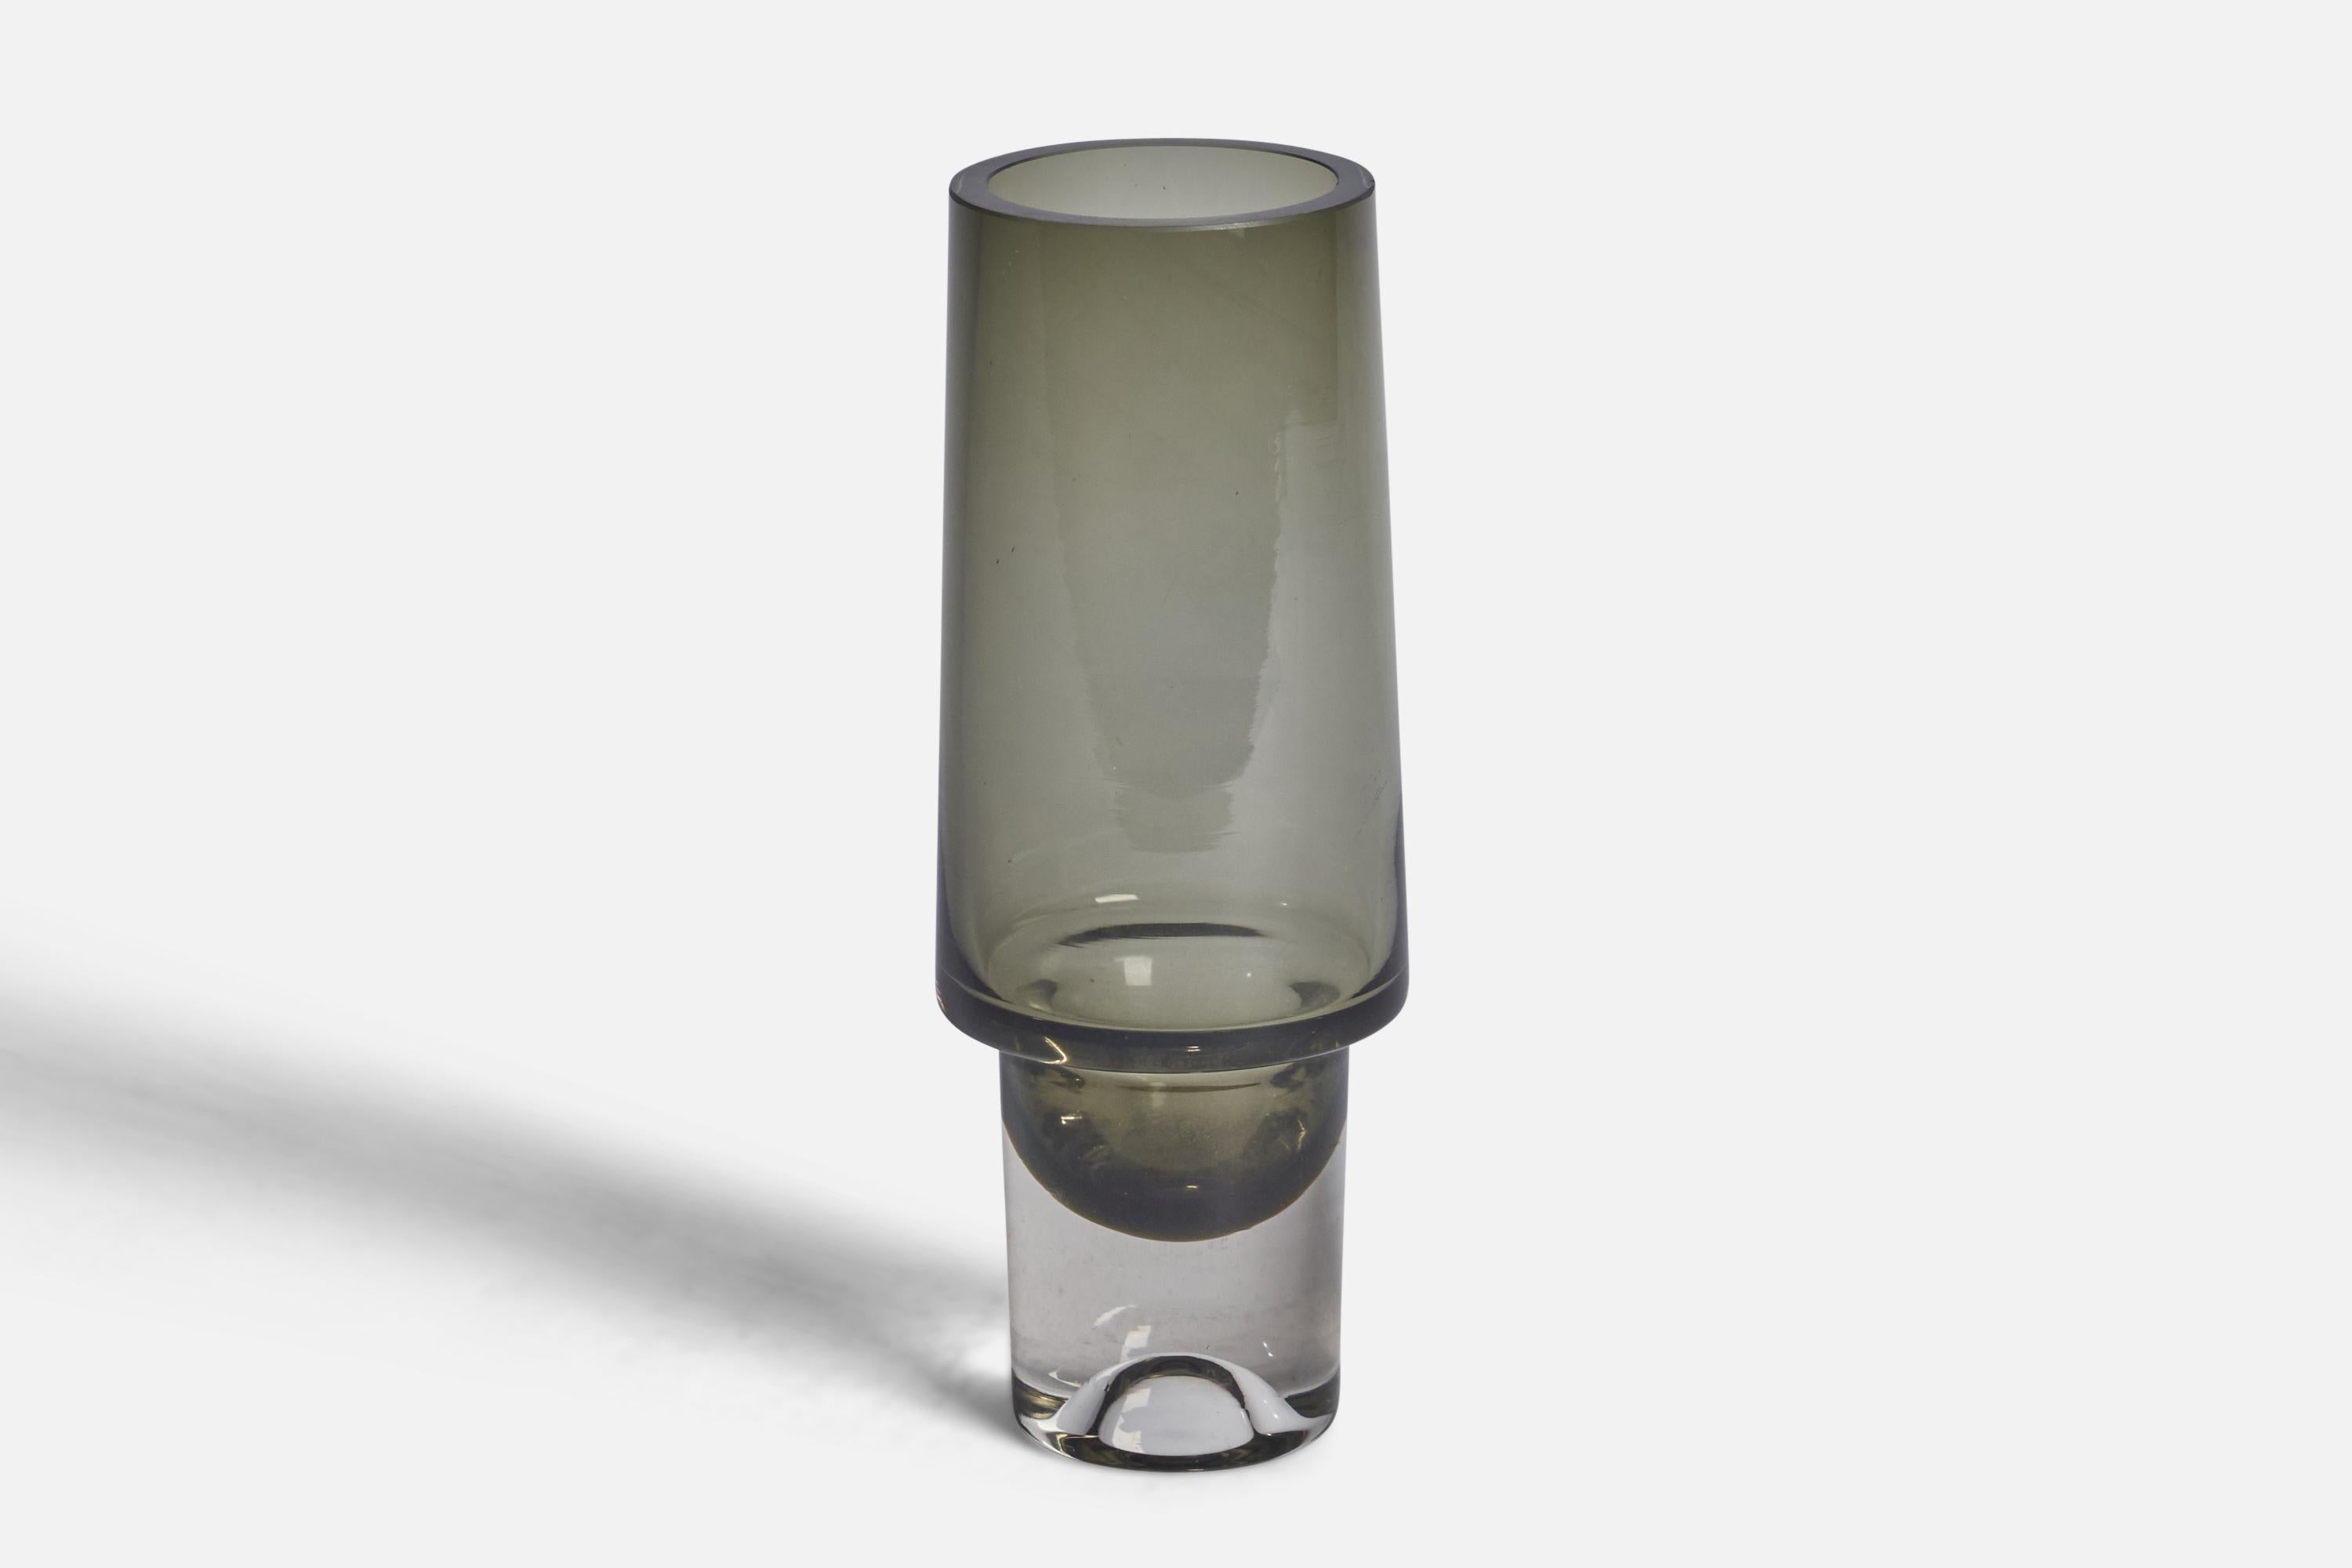 A blown glass vase designed by Tapio Wirkkala, and produced by Iittala, Finland, 1960s